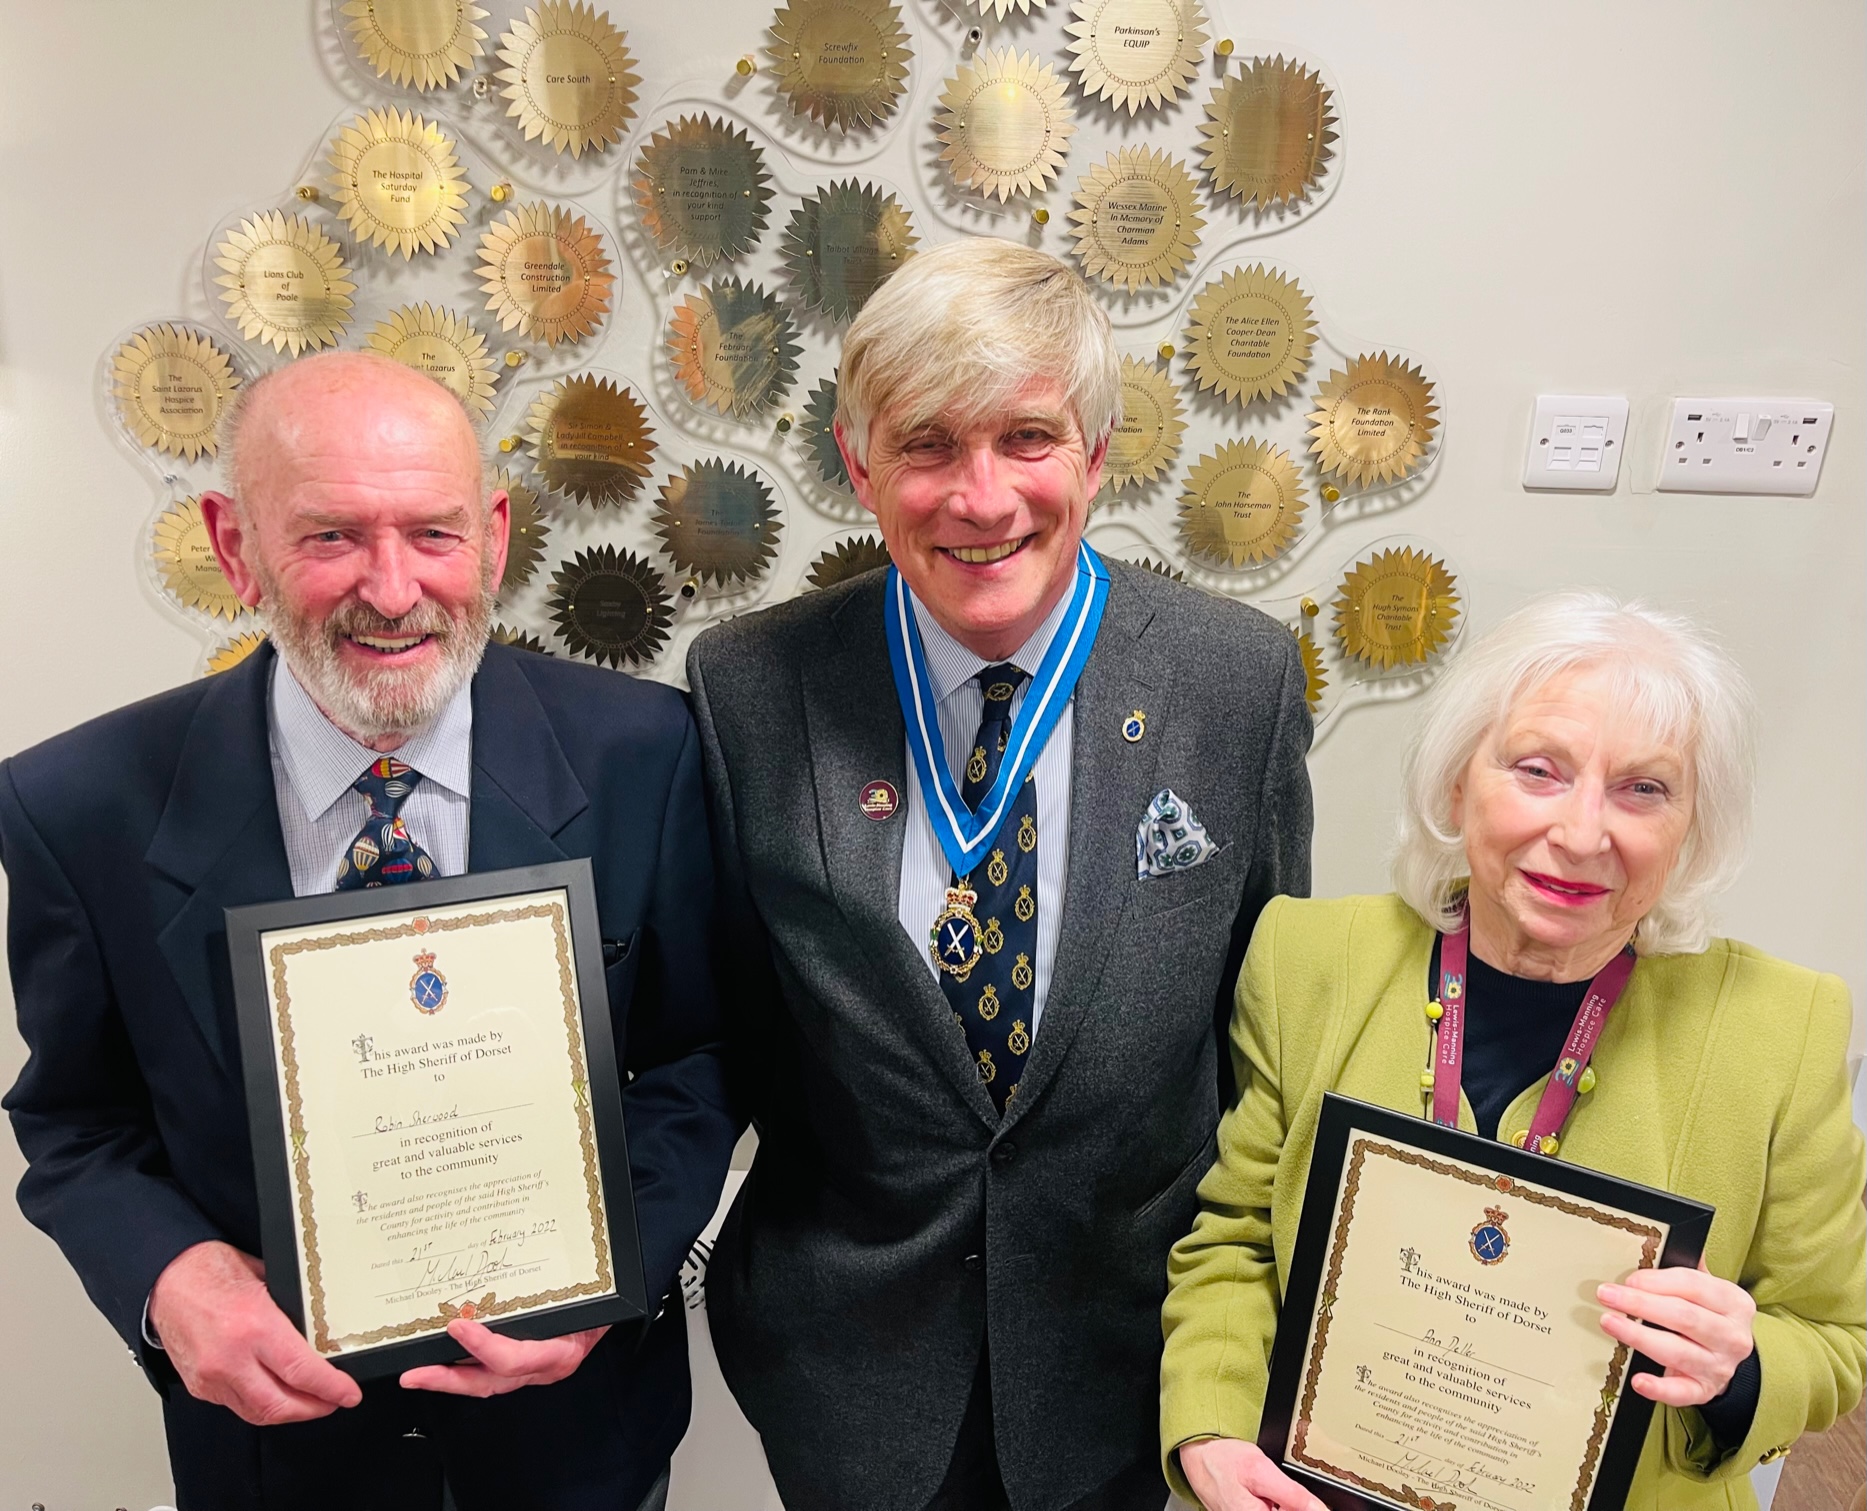 60 years of voluntary service celebrated at Lewis-Manning Hospice Care with High Sheriff Award